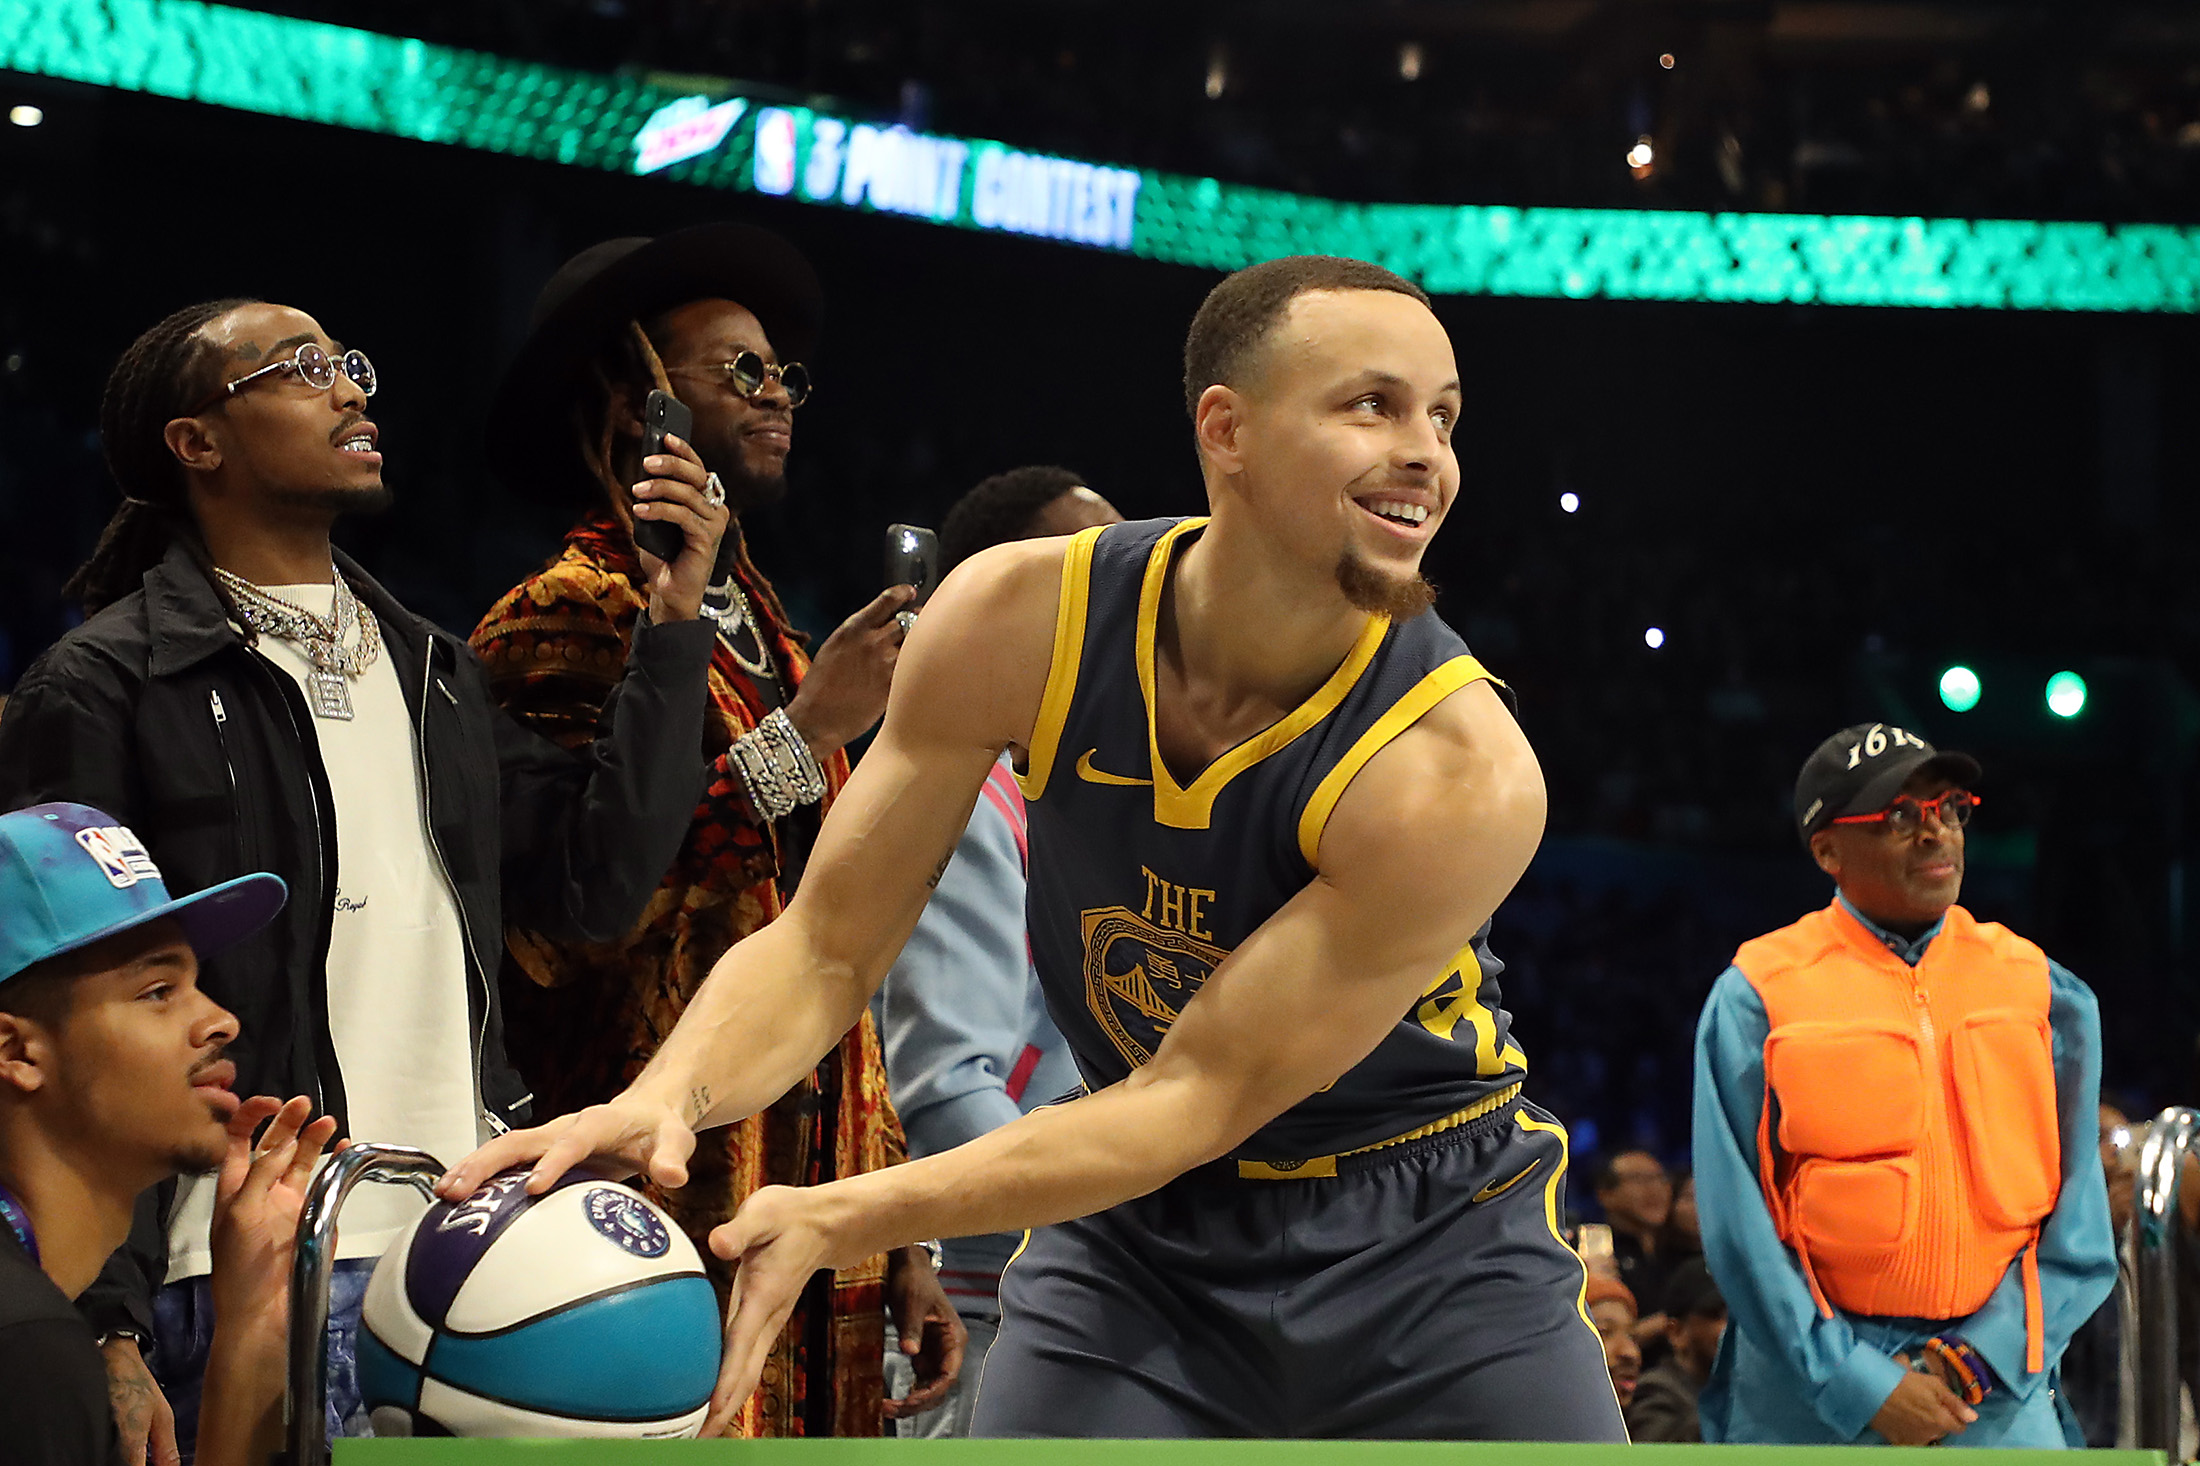 Stephen Curry won't have his jersey retired by Davidson College